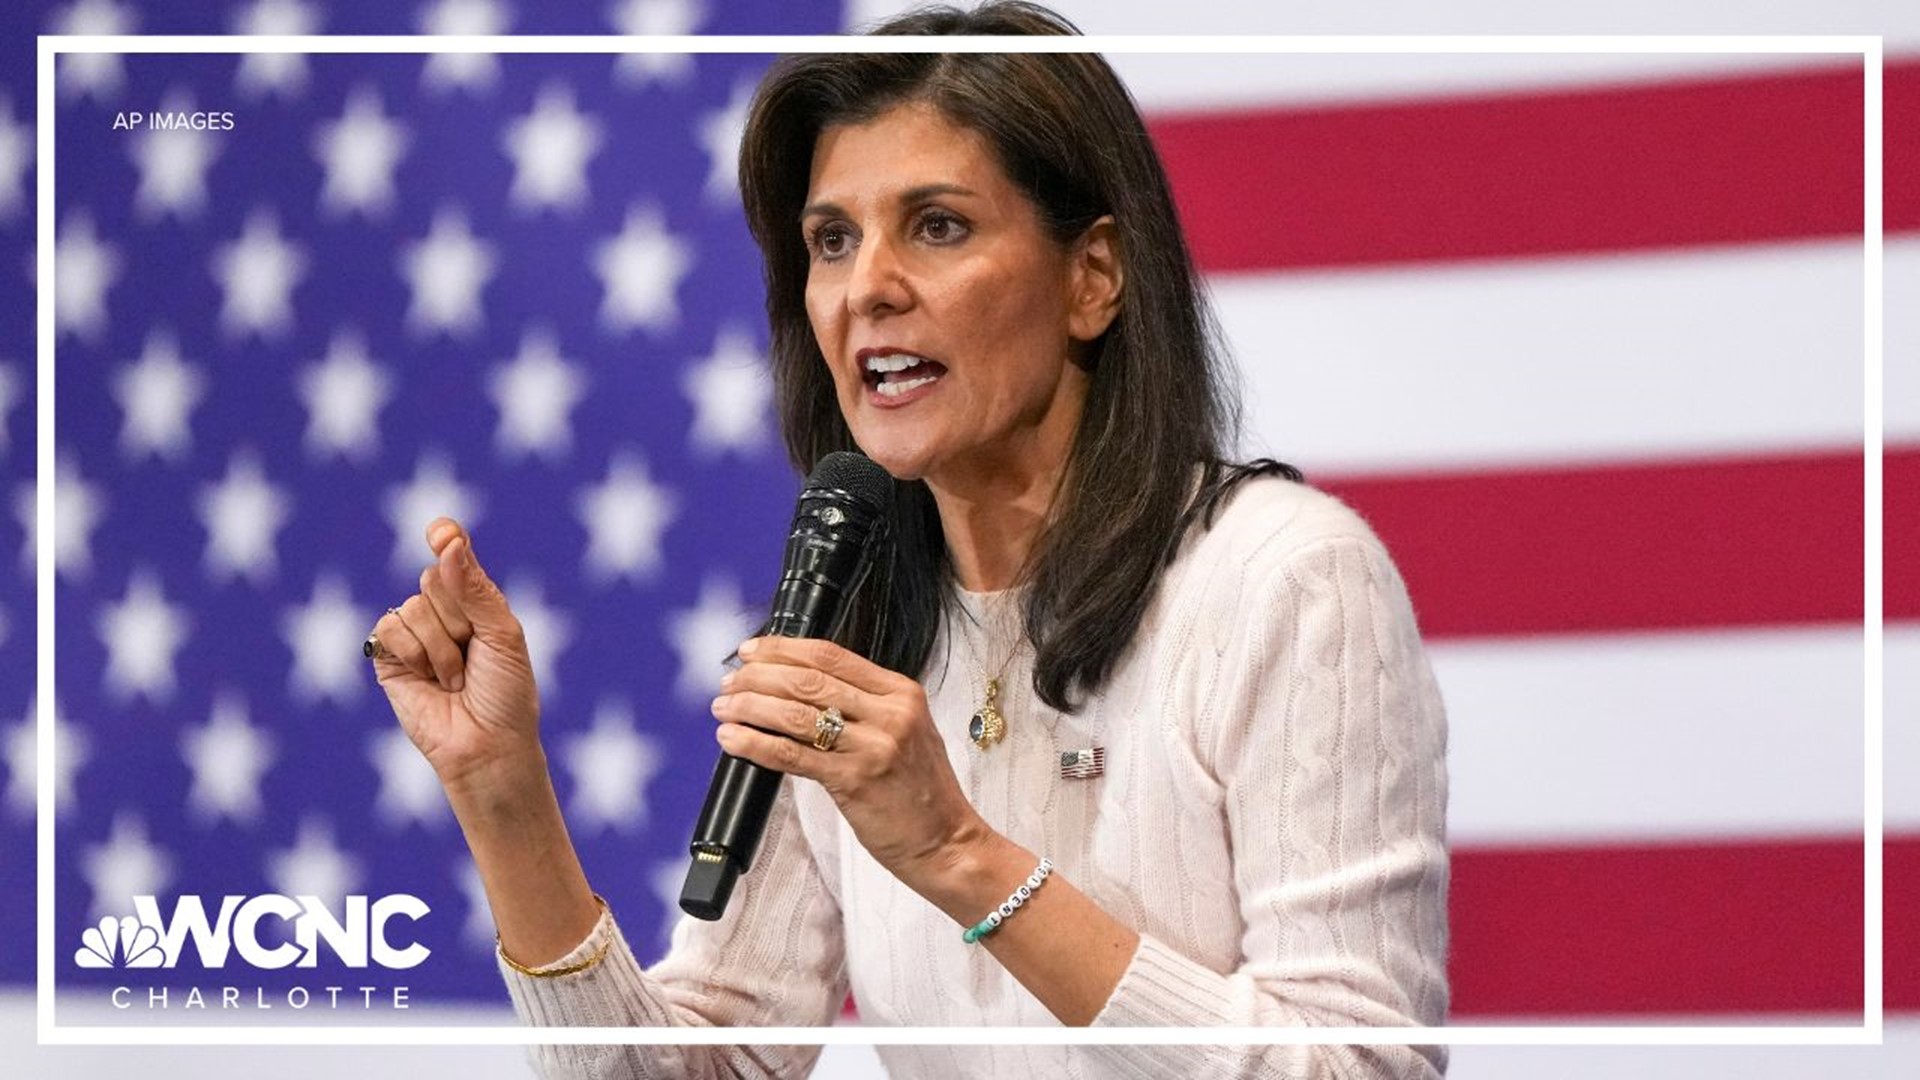 MTP: Haley on Trump following the Constitution if elected | wcnc.com